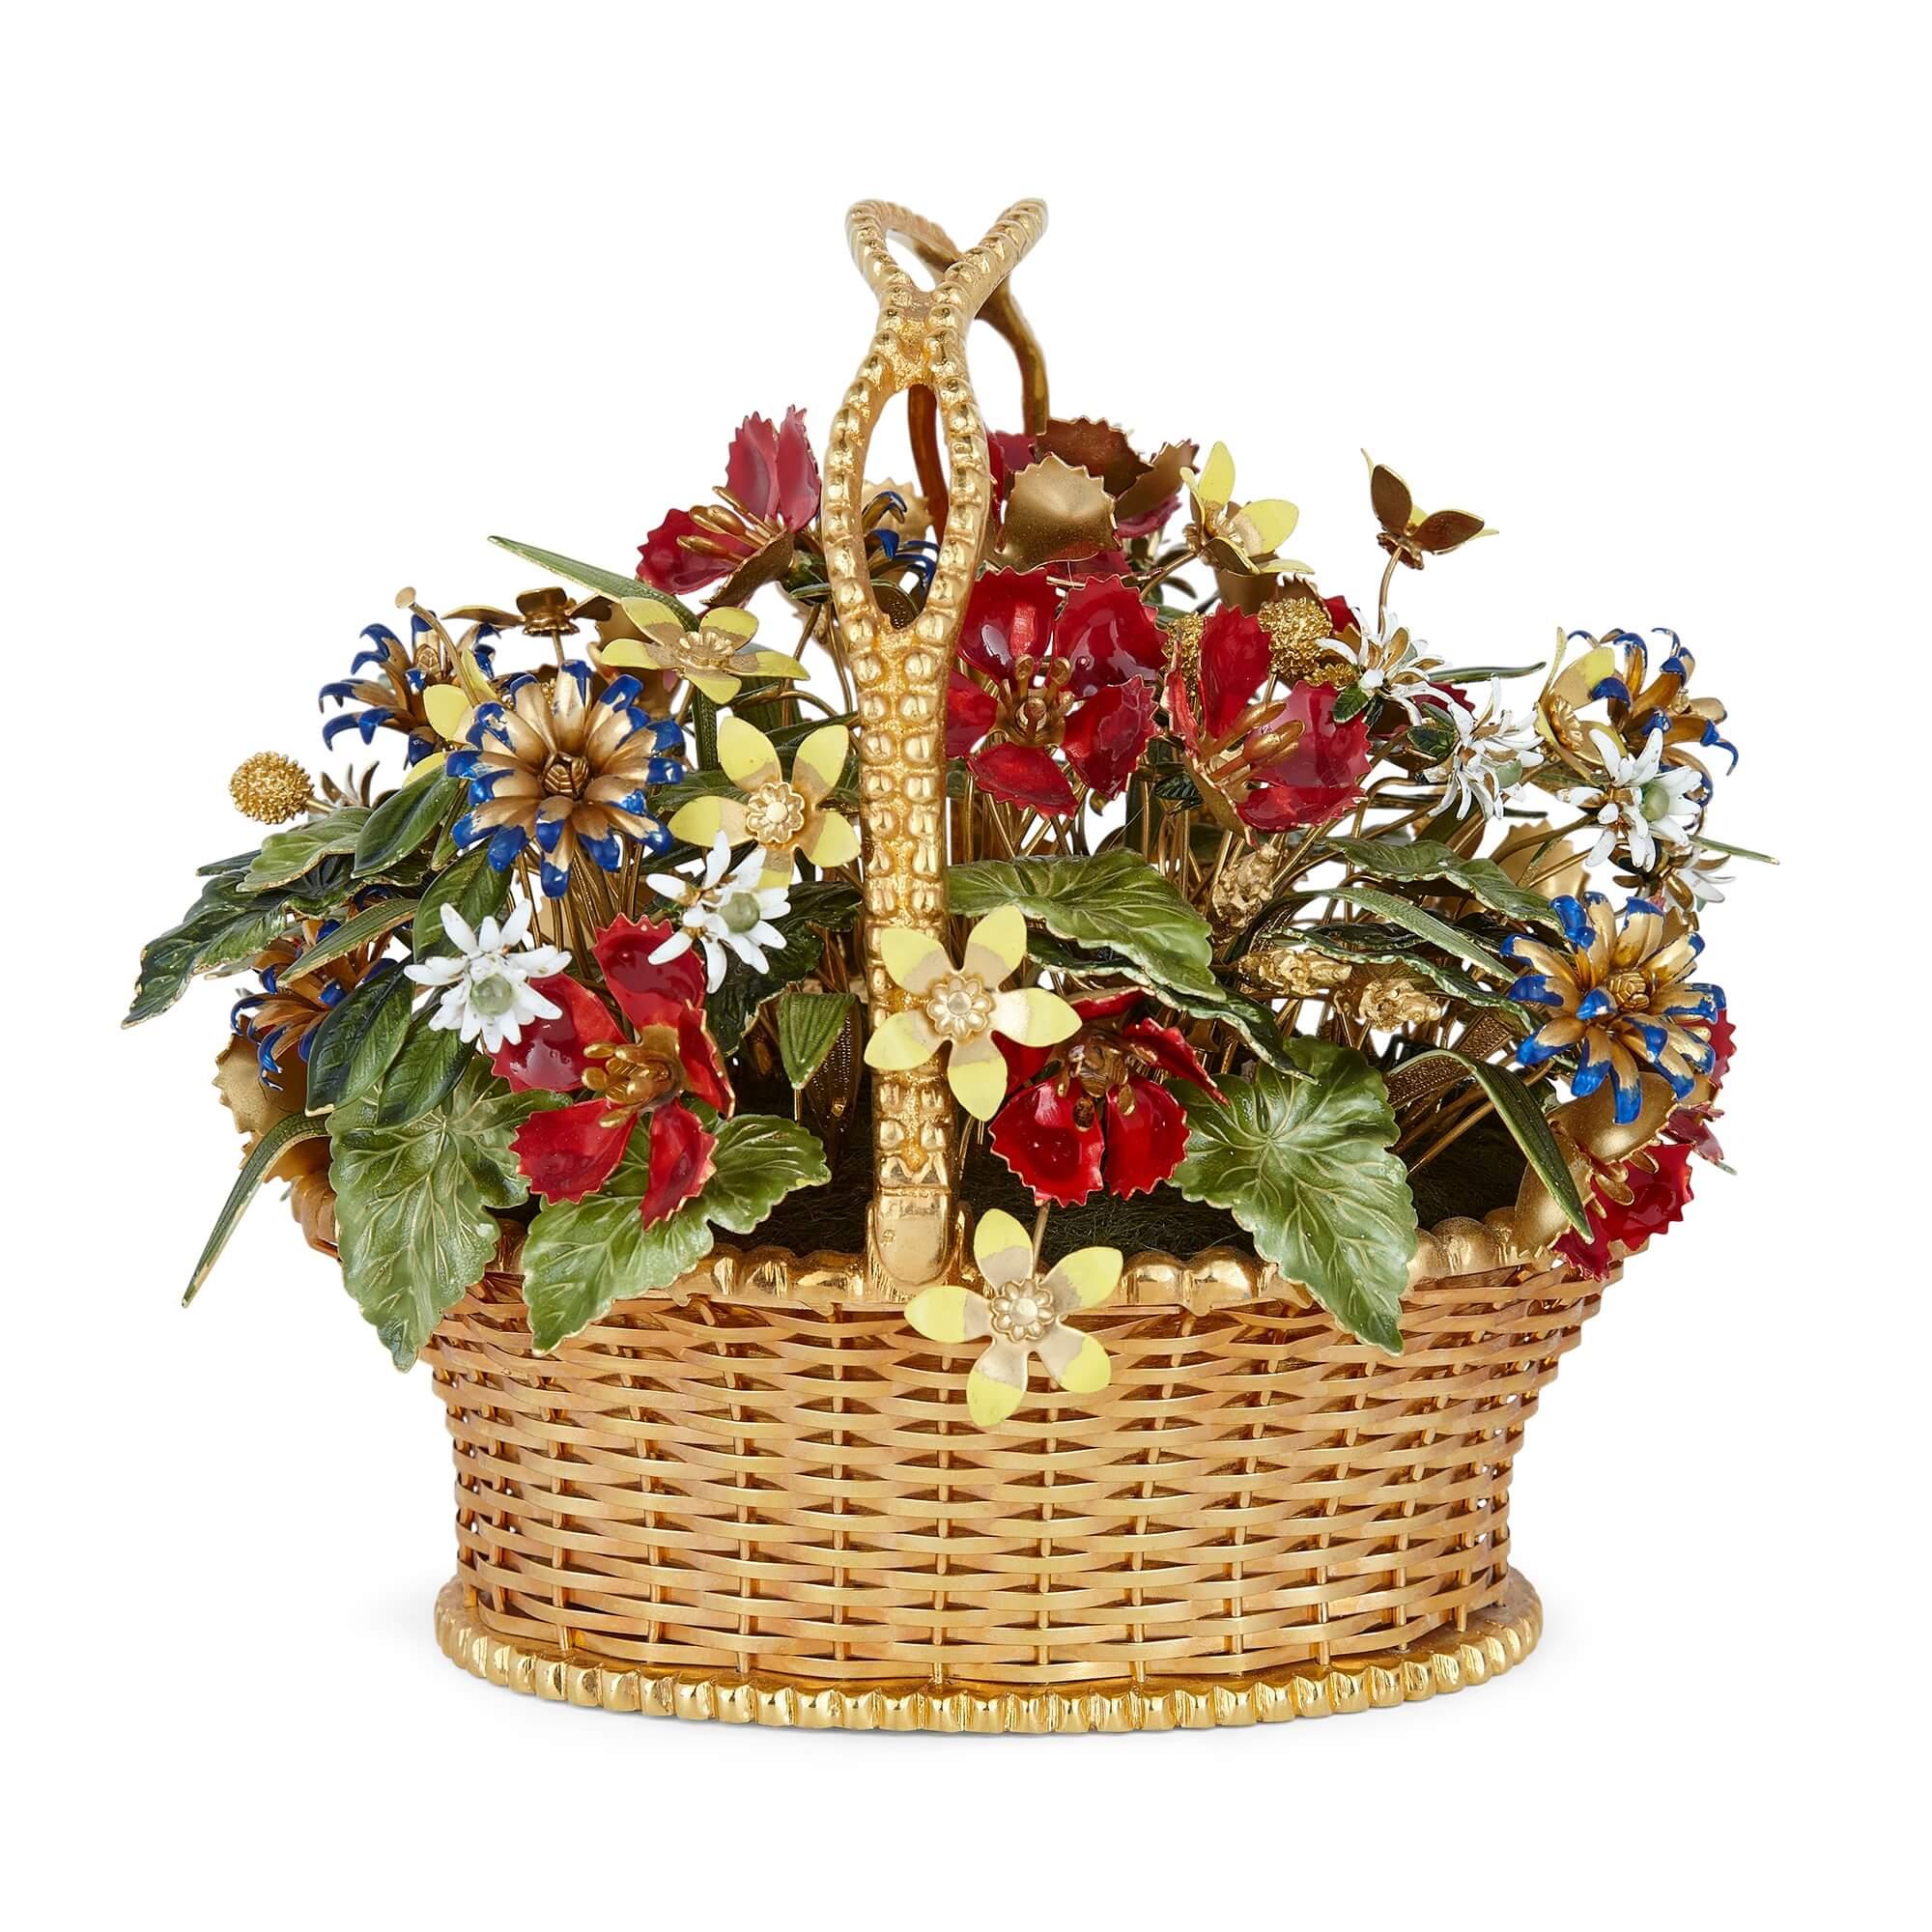 Pair of gilt-metal and enamel ‘Fleurs des Siècles’ flower baskets
American, c. 1975
Height 16cm, width 18cm, depth 14cm

With their delicate beauty, these two flower baskets are sensational objets d’art for the budding collector. The baskets are